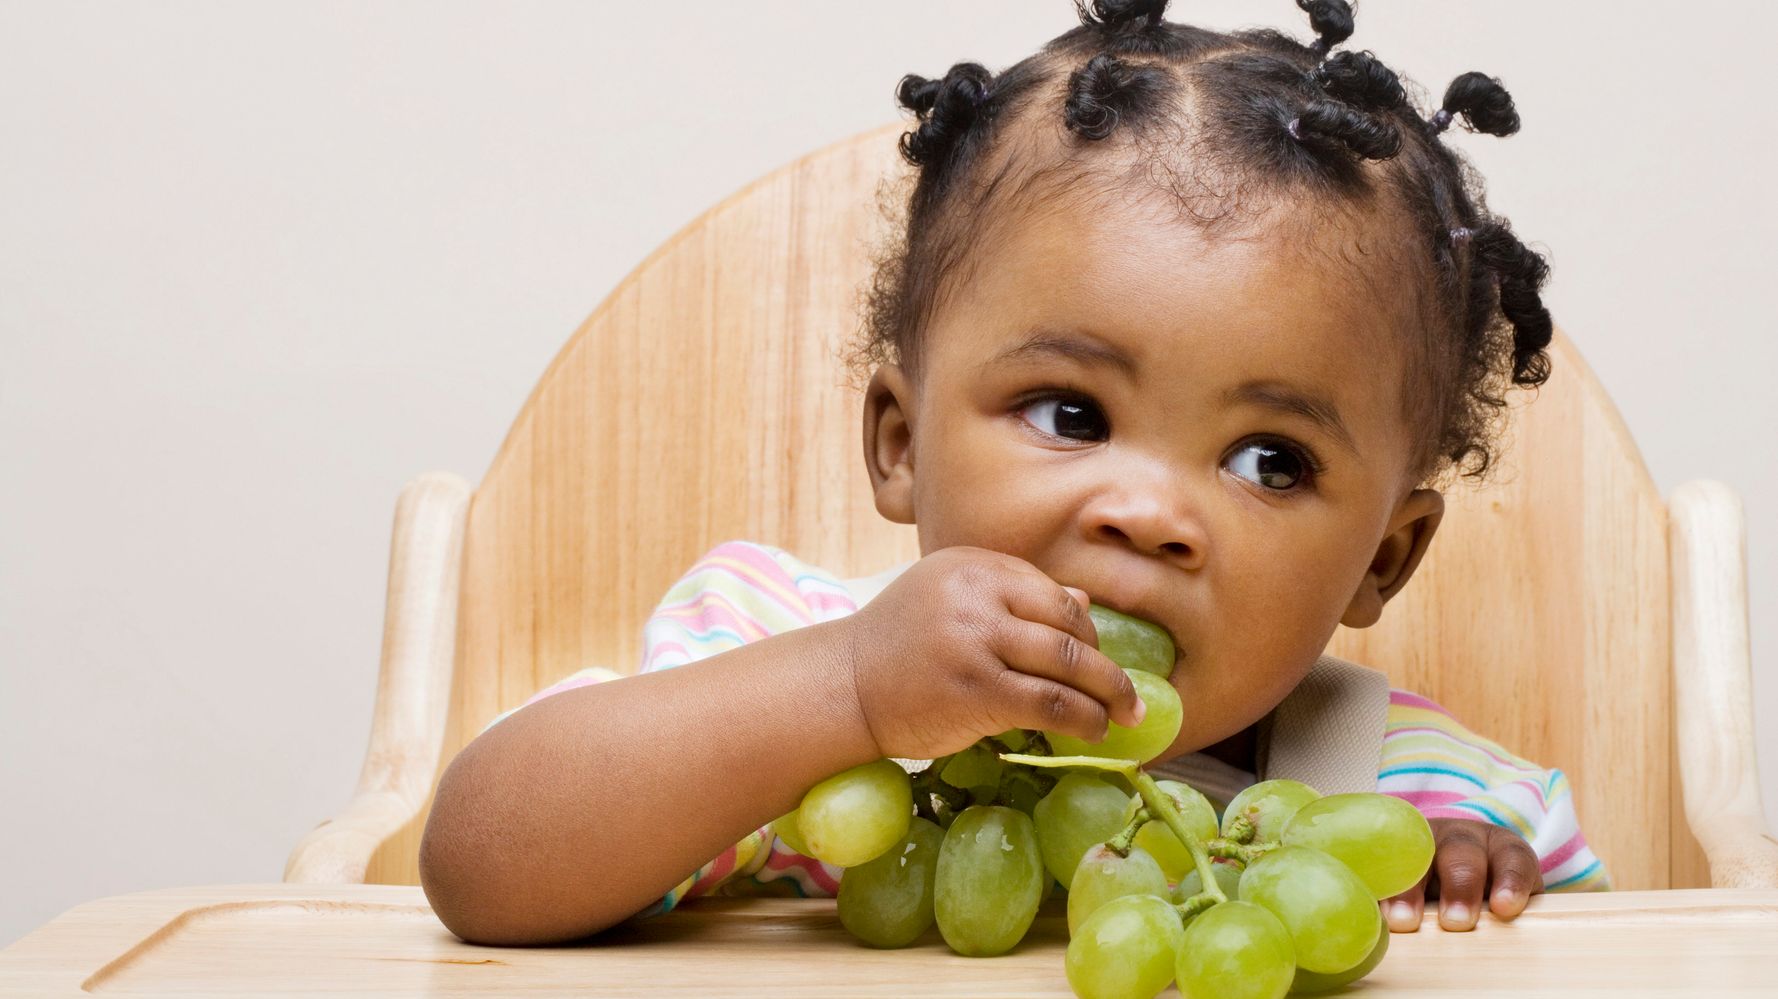 Five seemingly harmless things your toddler can choke on, EntertainmentSA News South Africa